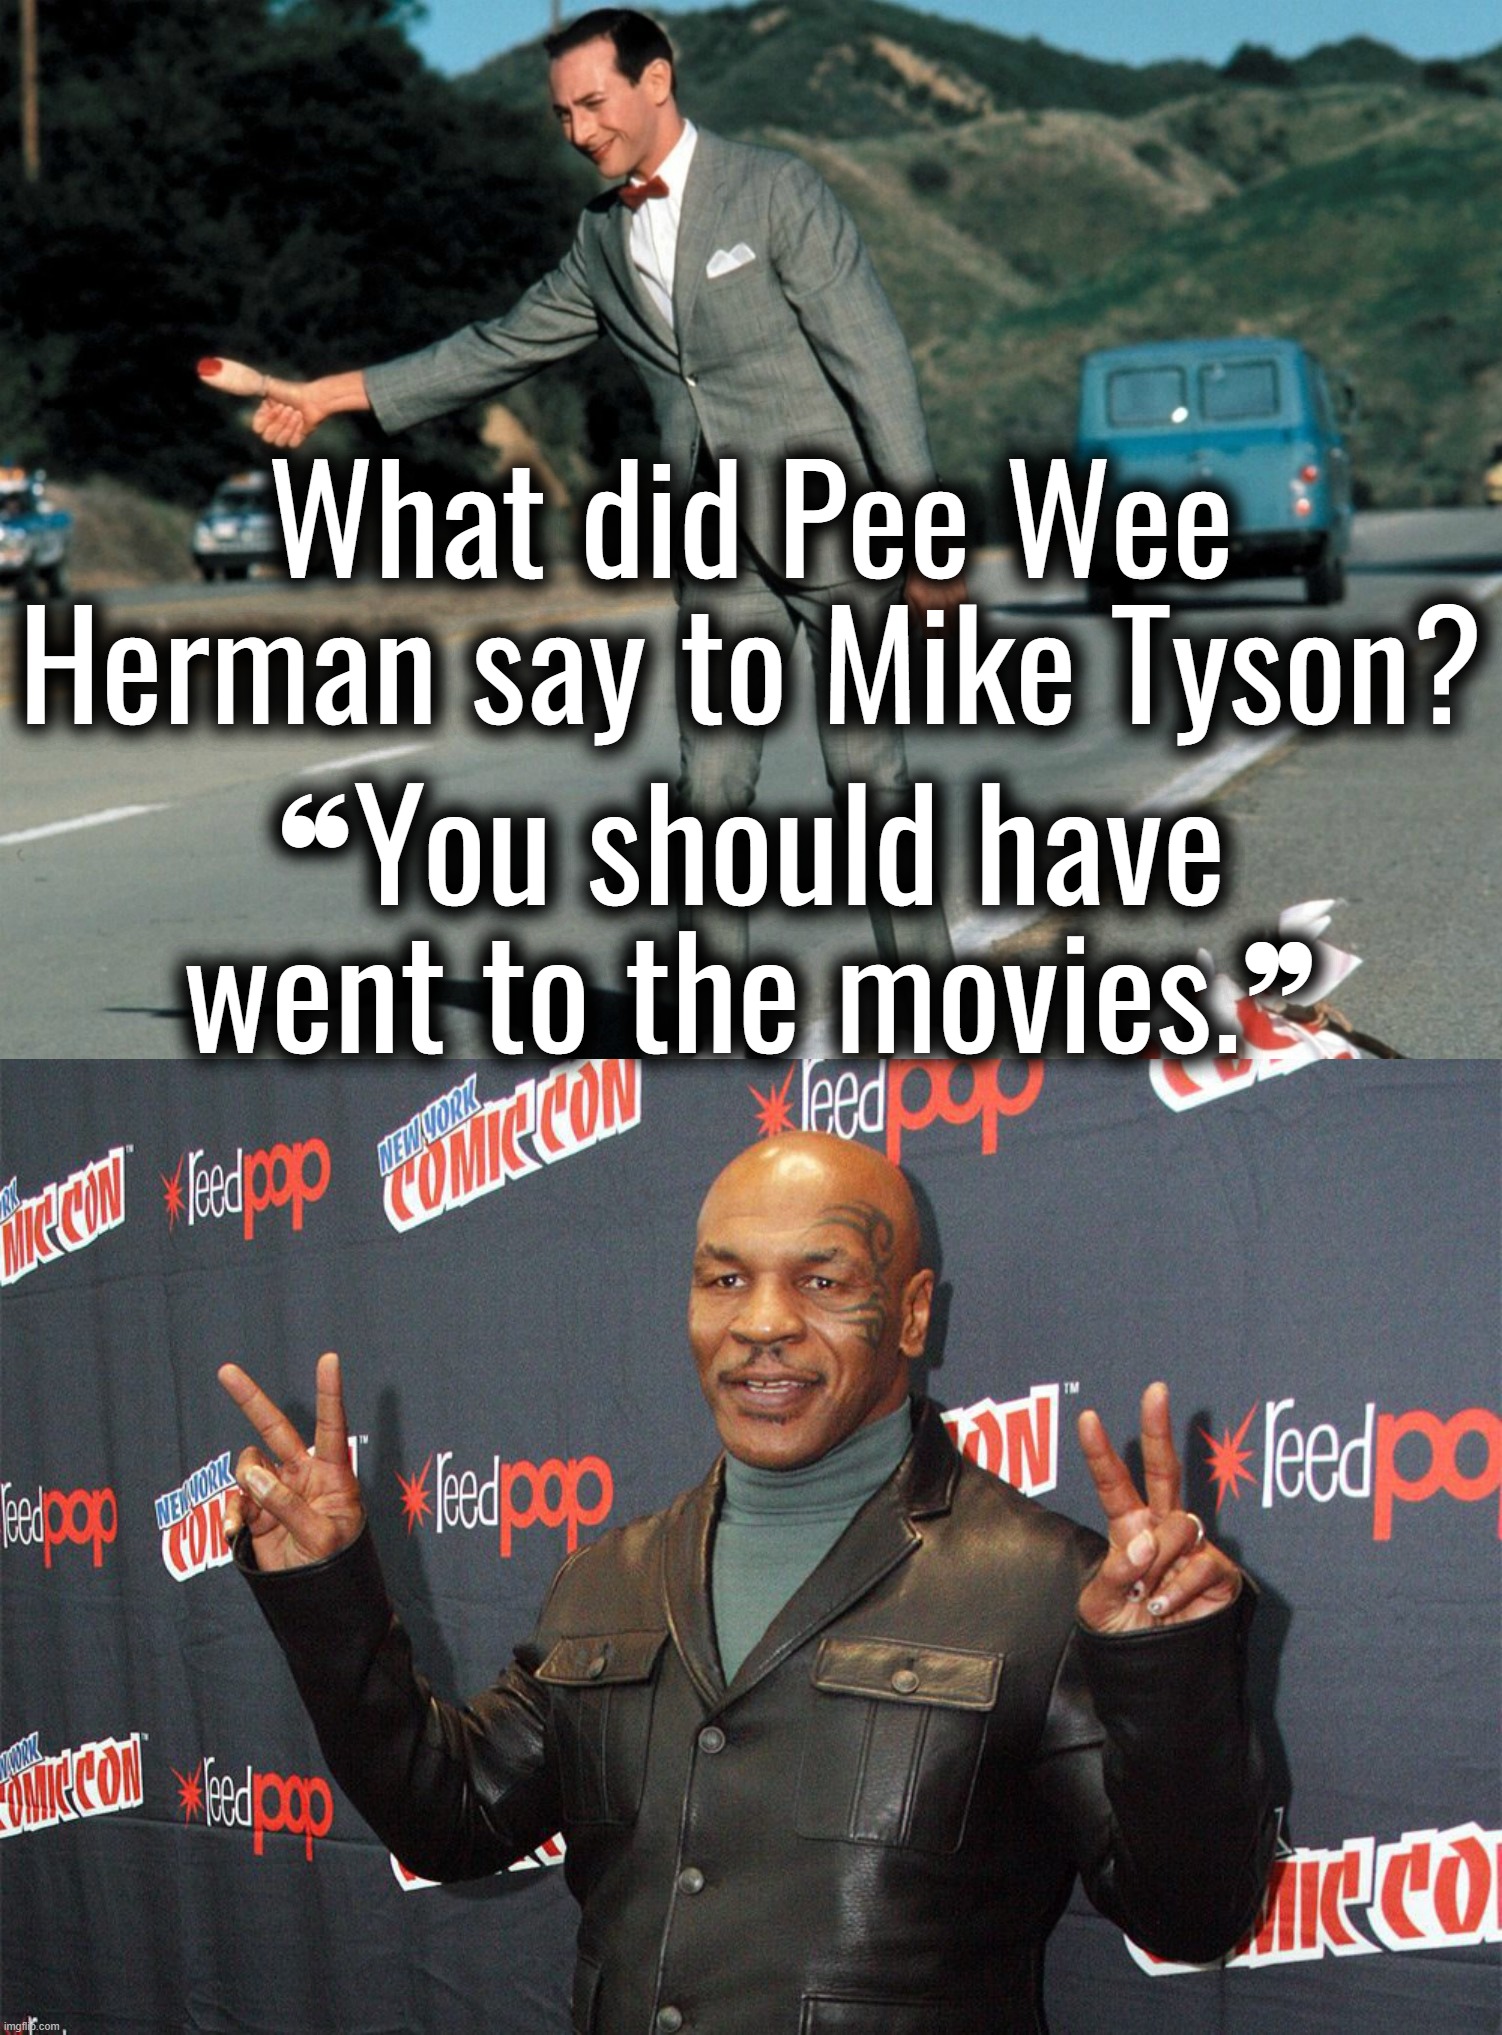 Pee Wee Herman's advice to Mike Tyson | What did Pee Wee Herman say to Mike Tyson? ❝You should have went to the movies.❞ | image tagged in pee wee herman,mike tyson,jokes,movies,trololol | made w/ Imgflip meme maker